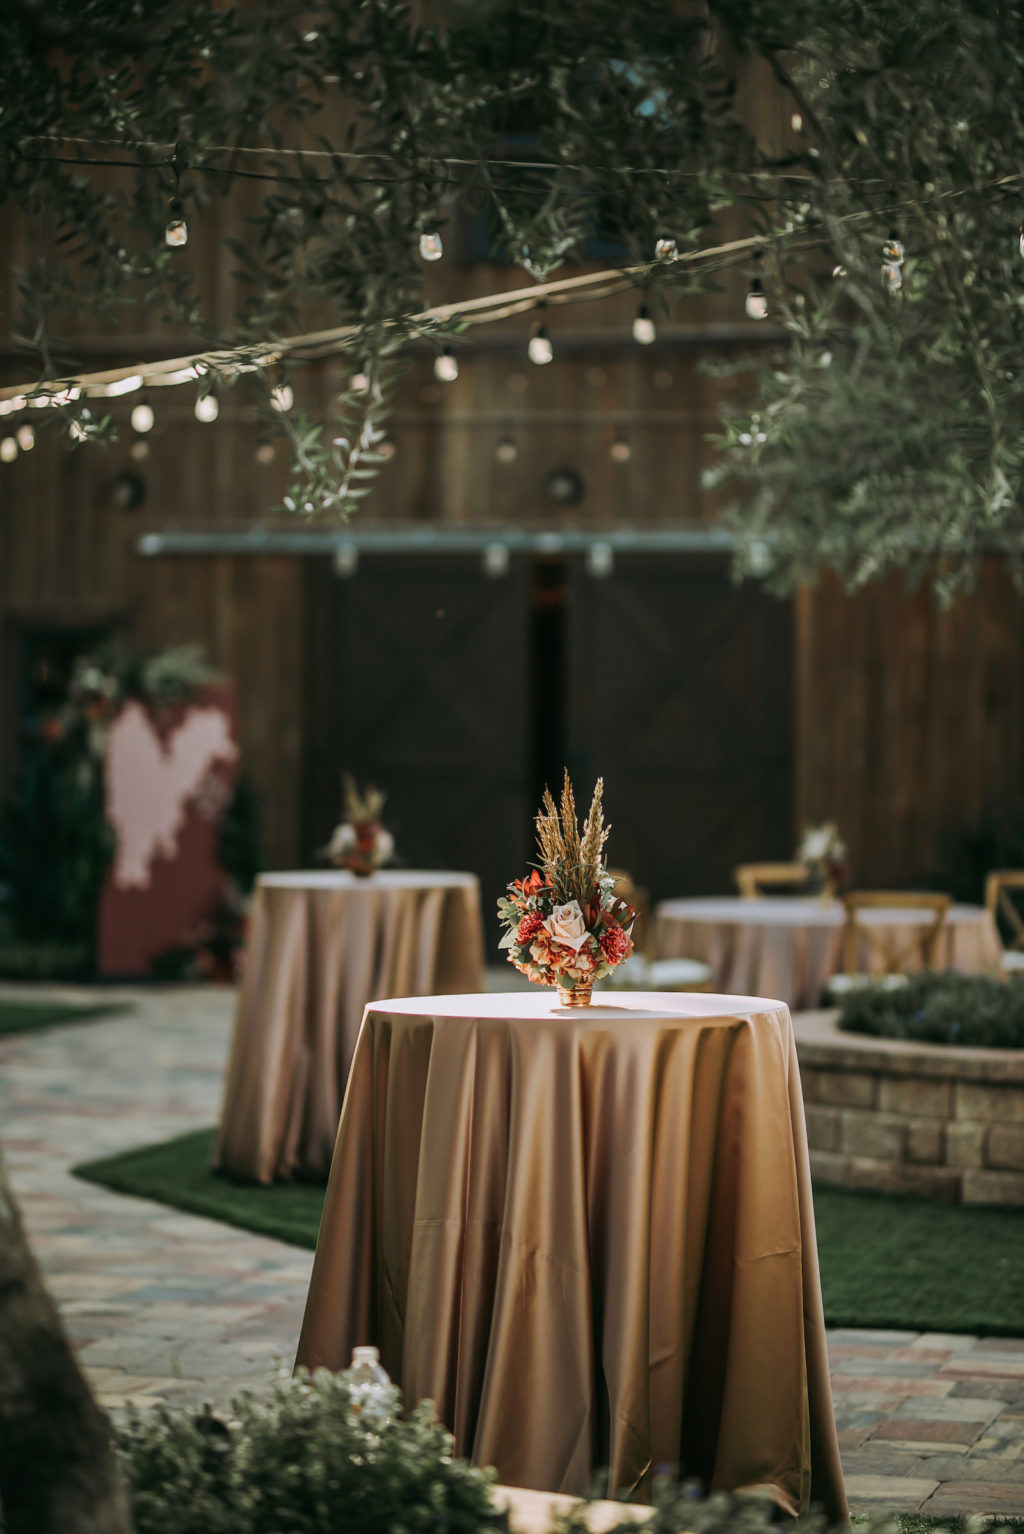 Outdoor Rustic Cocktail Hour Wedding Decor, String Lights, Tall Tables with Champagne/Gold Table Linens, Small Floral Centerpiece with Pampas Grass